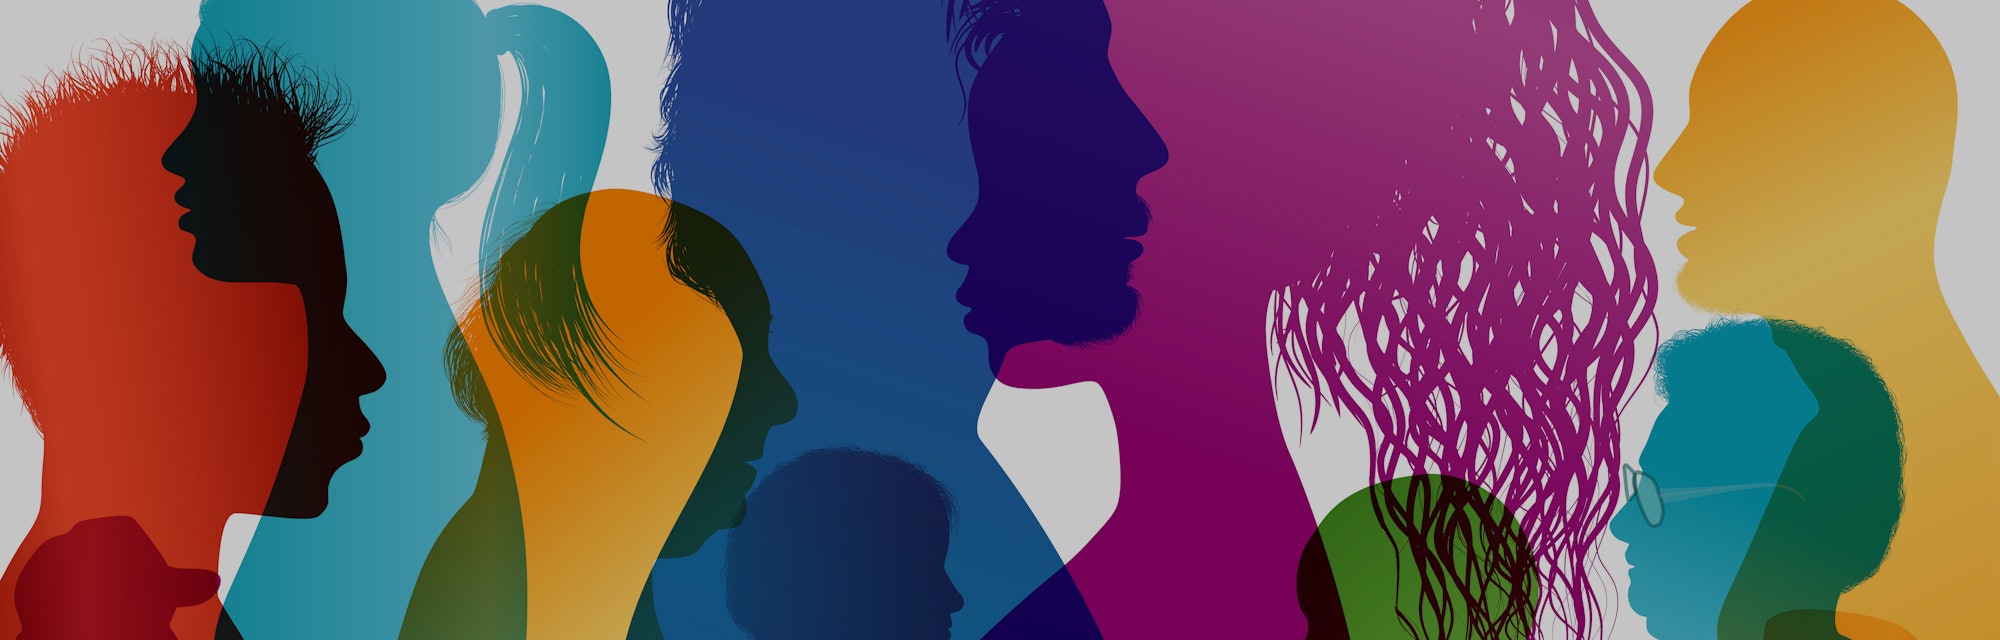 Silhouette profiles of multiracial people. Intercontinental dialogue. Group of people of different a...